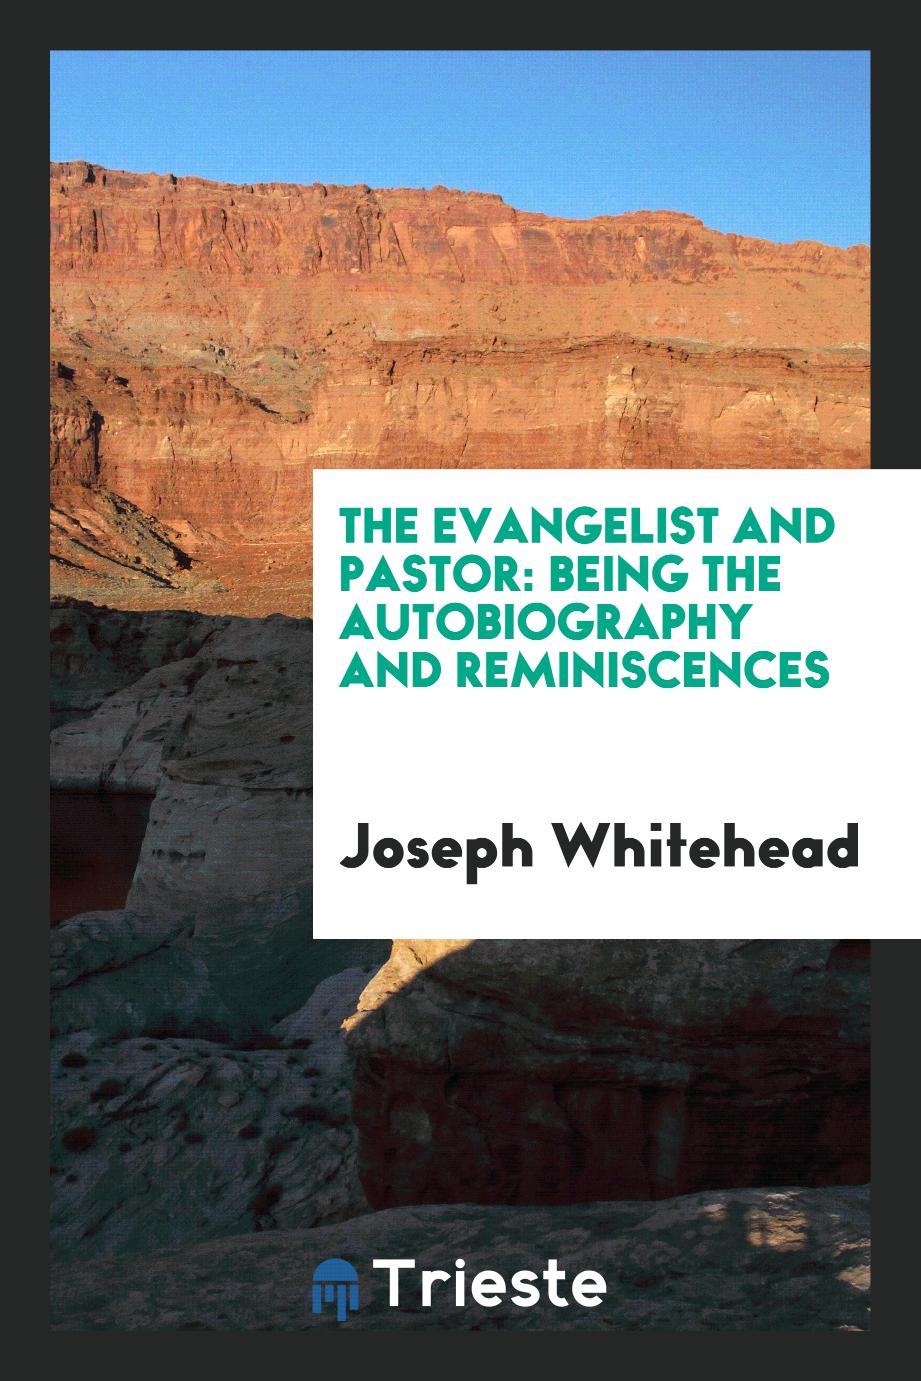 The Evangelist and Pastor: Being the Autobiography and Reminiscences